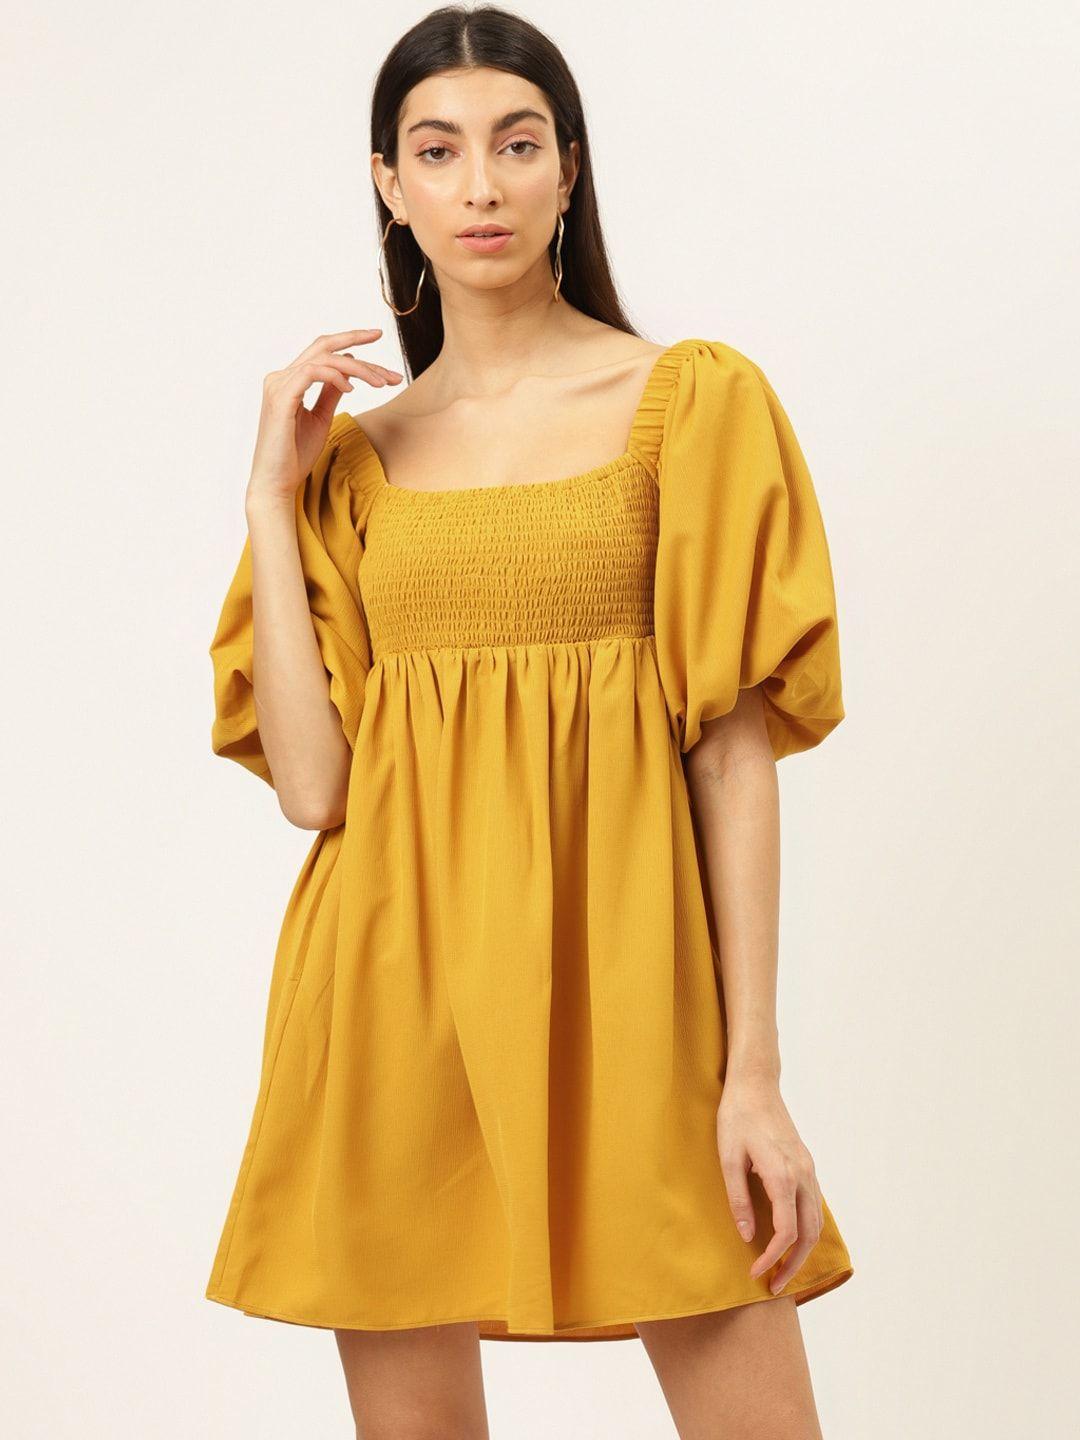 20dresses women mustard yellow smocked detail solid a-line dress